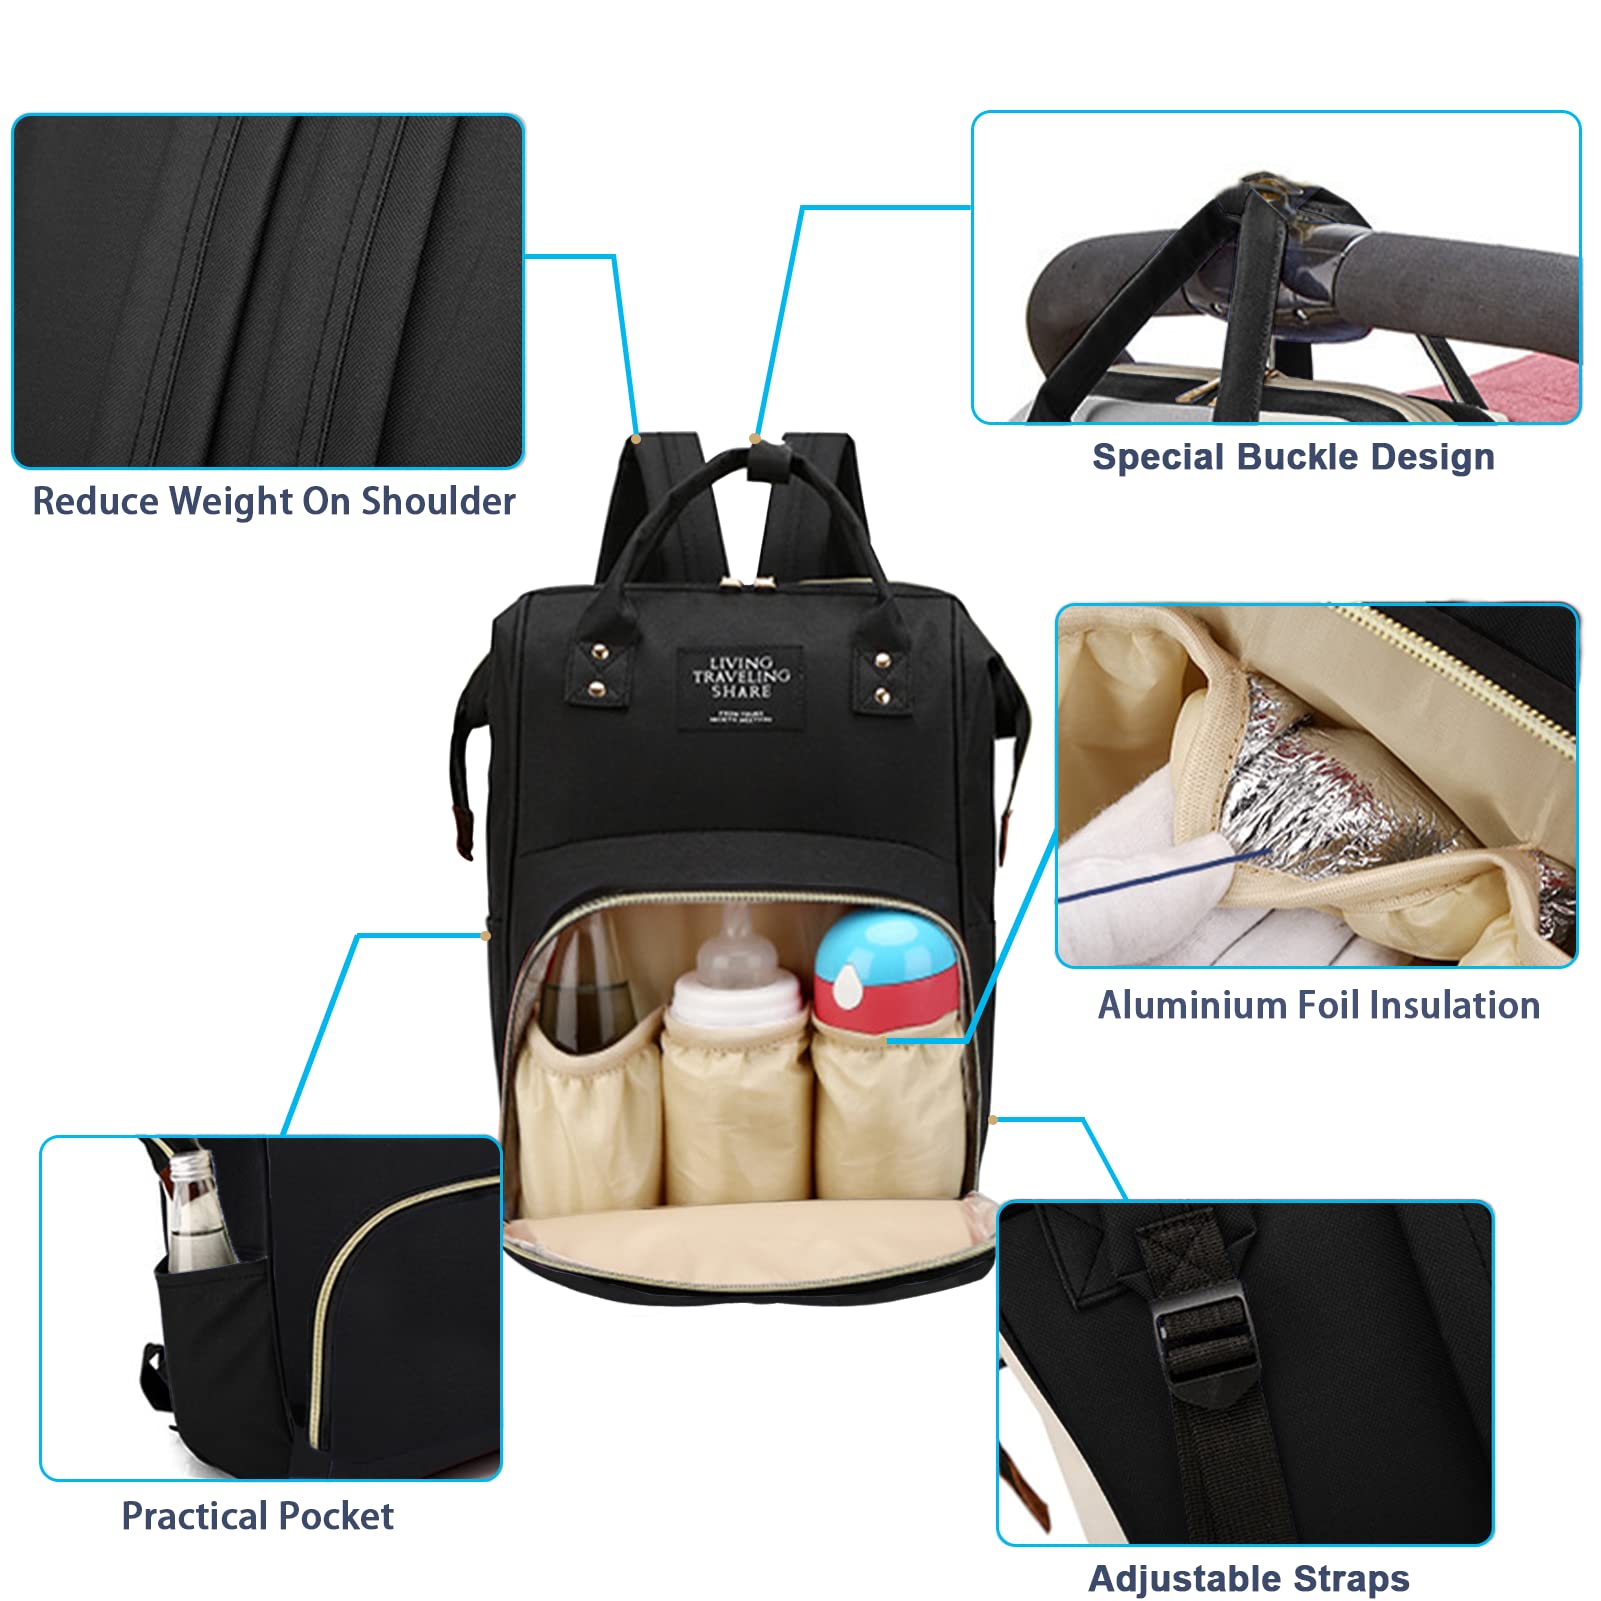 Diaper Bag with Organizing Pouches, Nappy Bags Handbag Multifunction Diaper Bag for Baby Care Travel Backpack Large Capacity Black